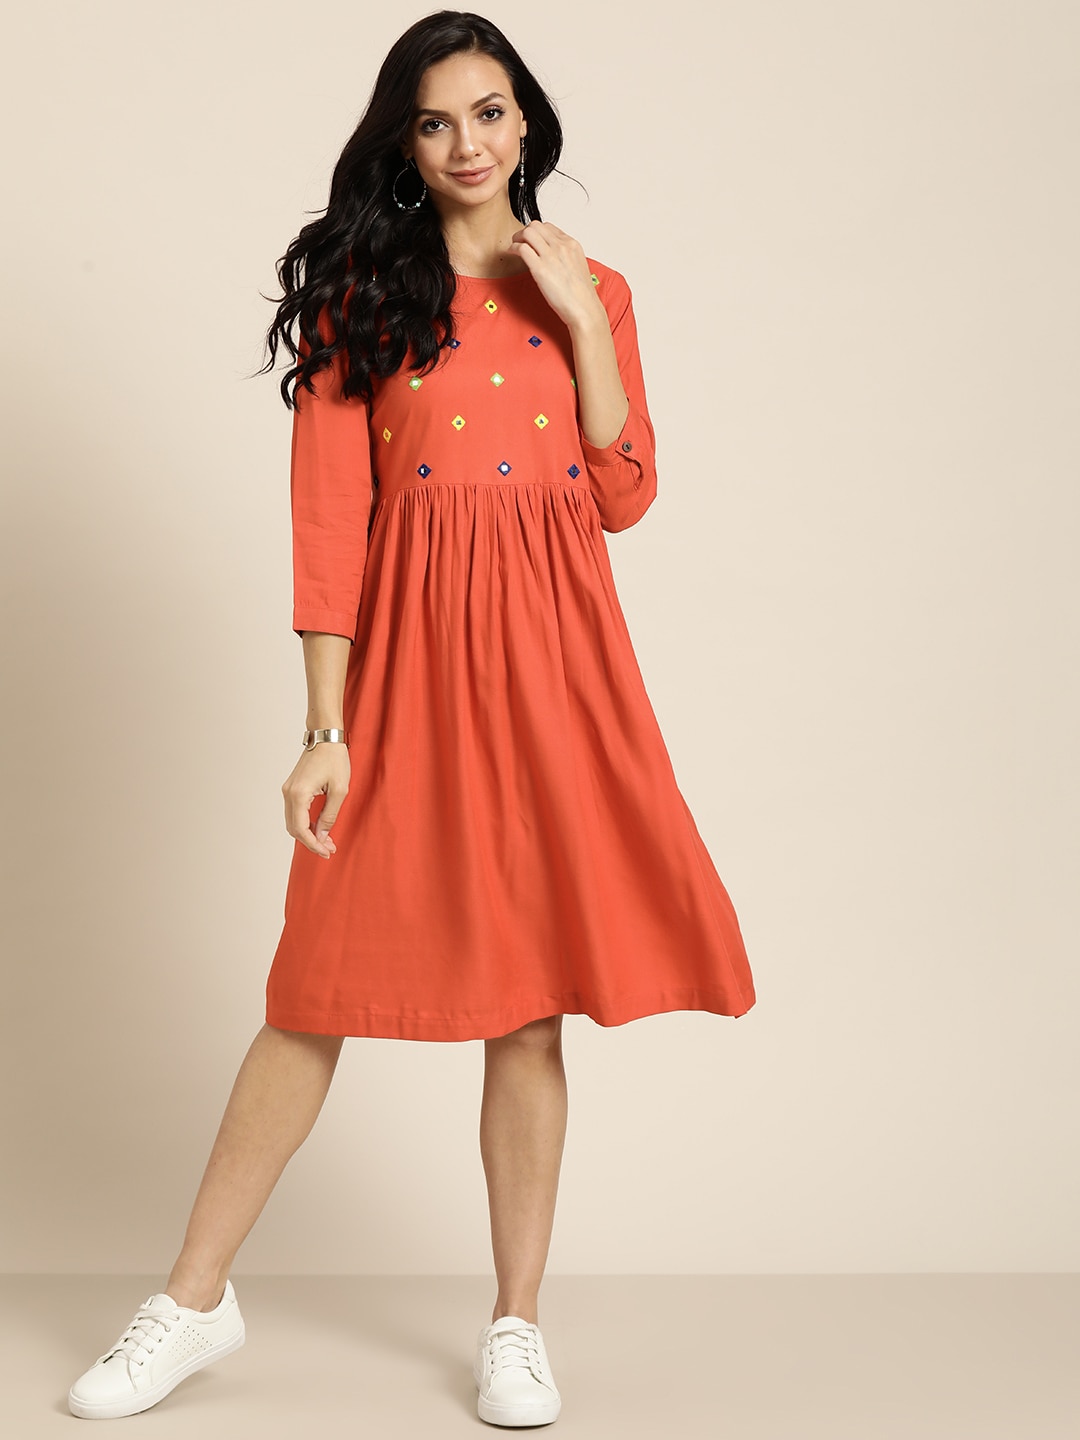 Sangria Coral Orange Mirror-Work Embroidered A-Line Dress Price in India